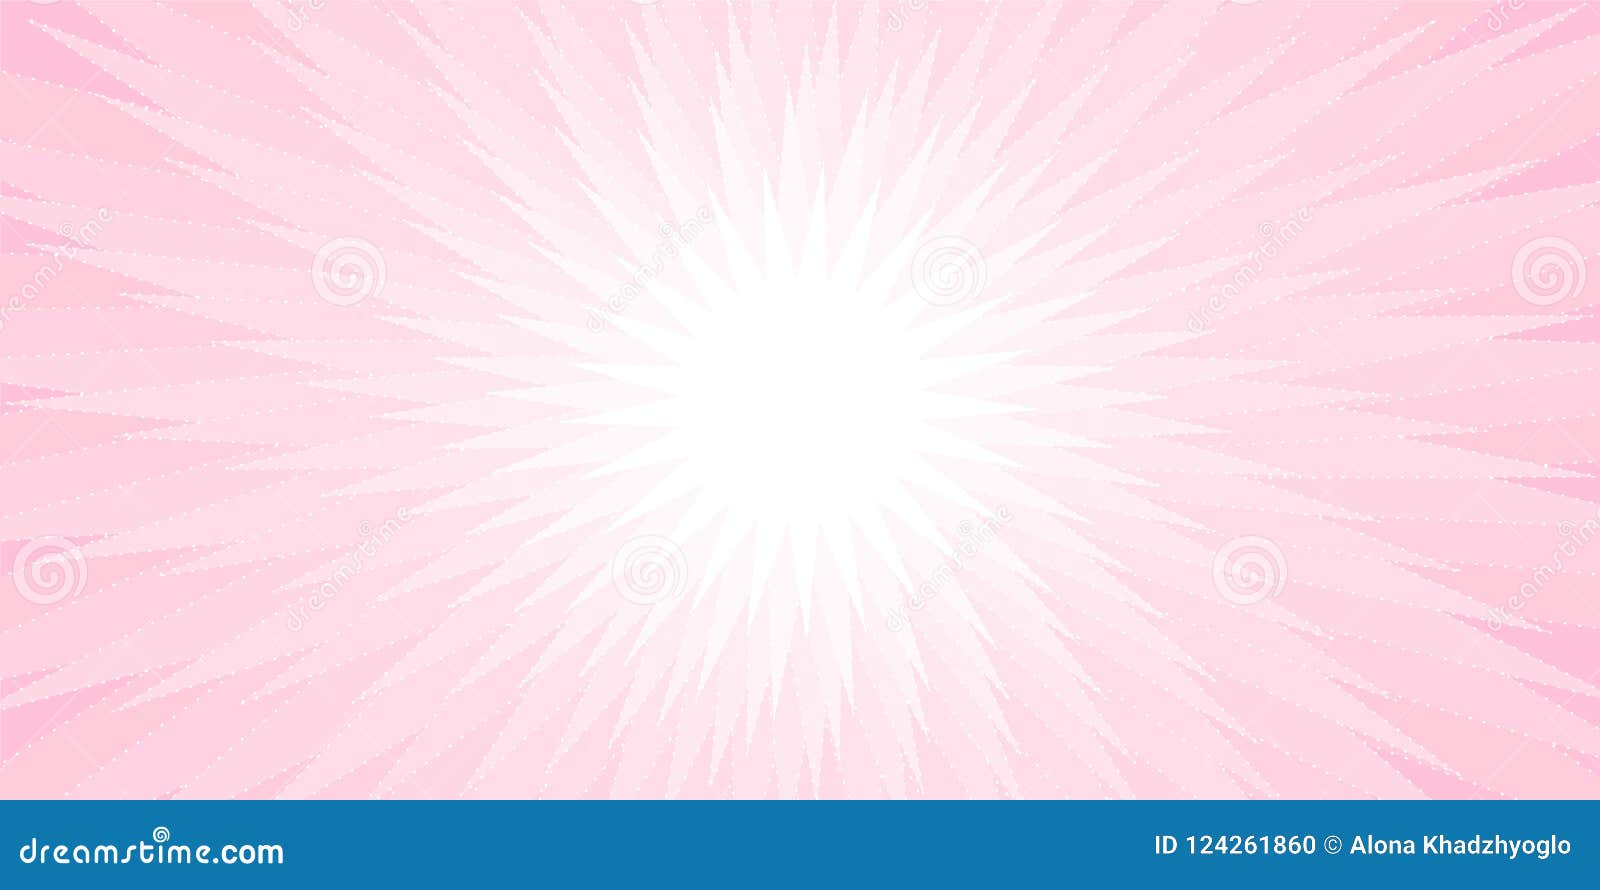 Pink Plain Stock Photos and Images - 123RF